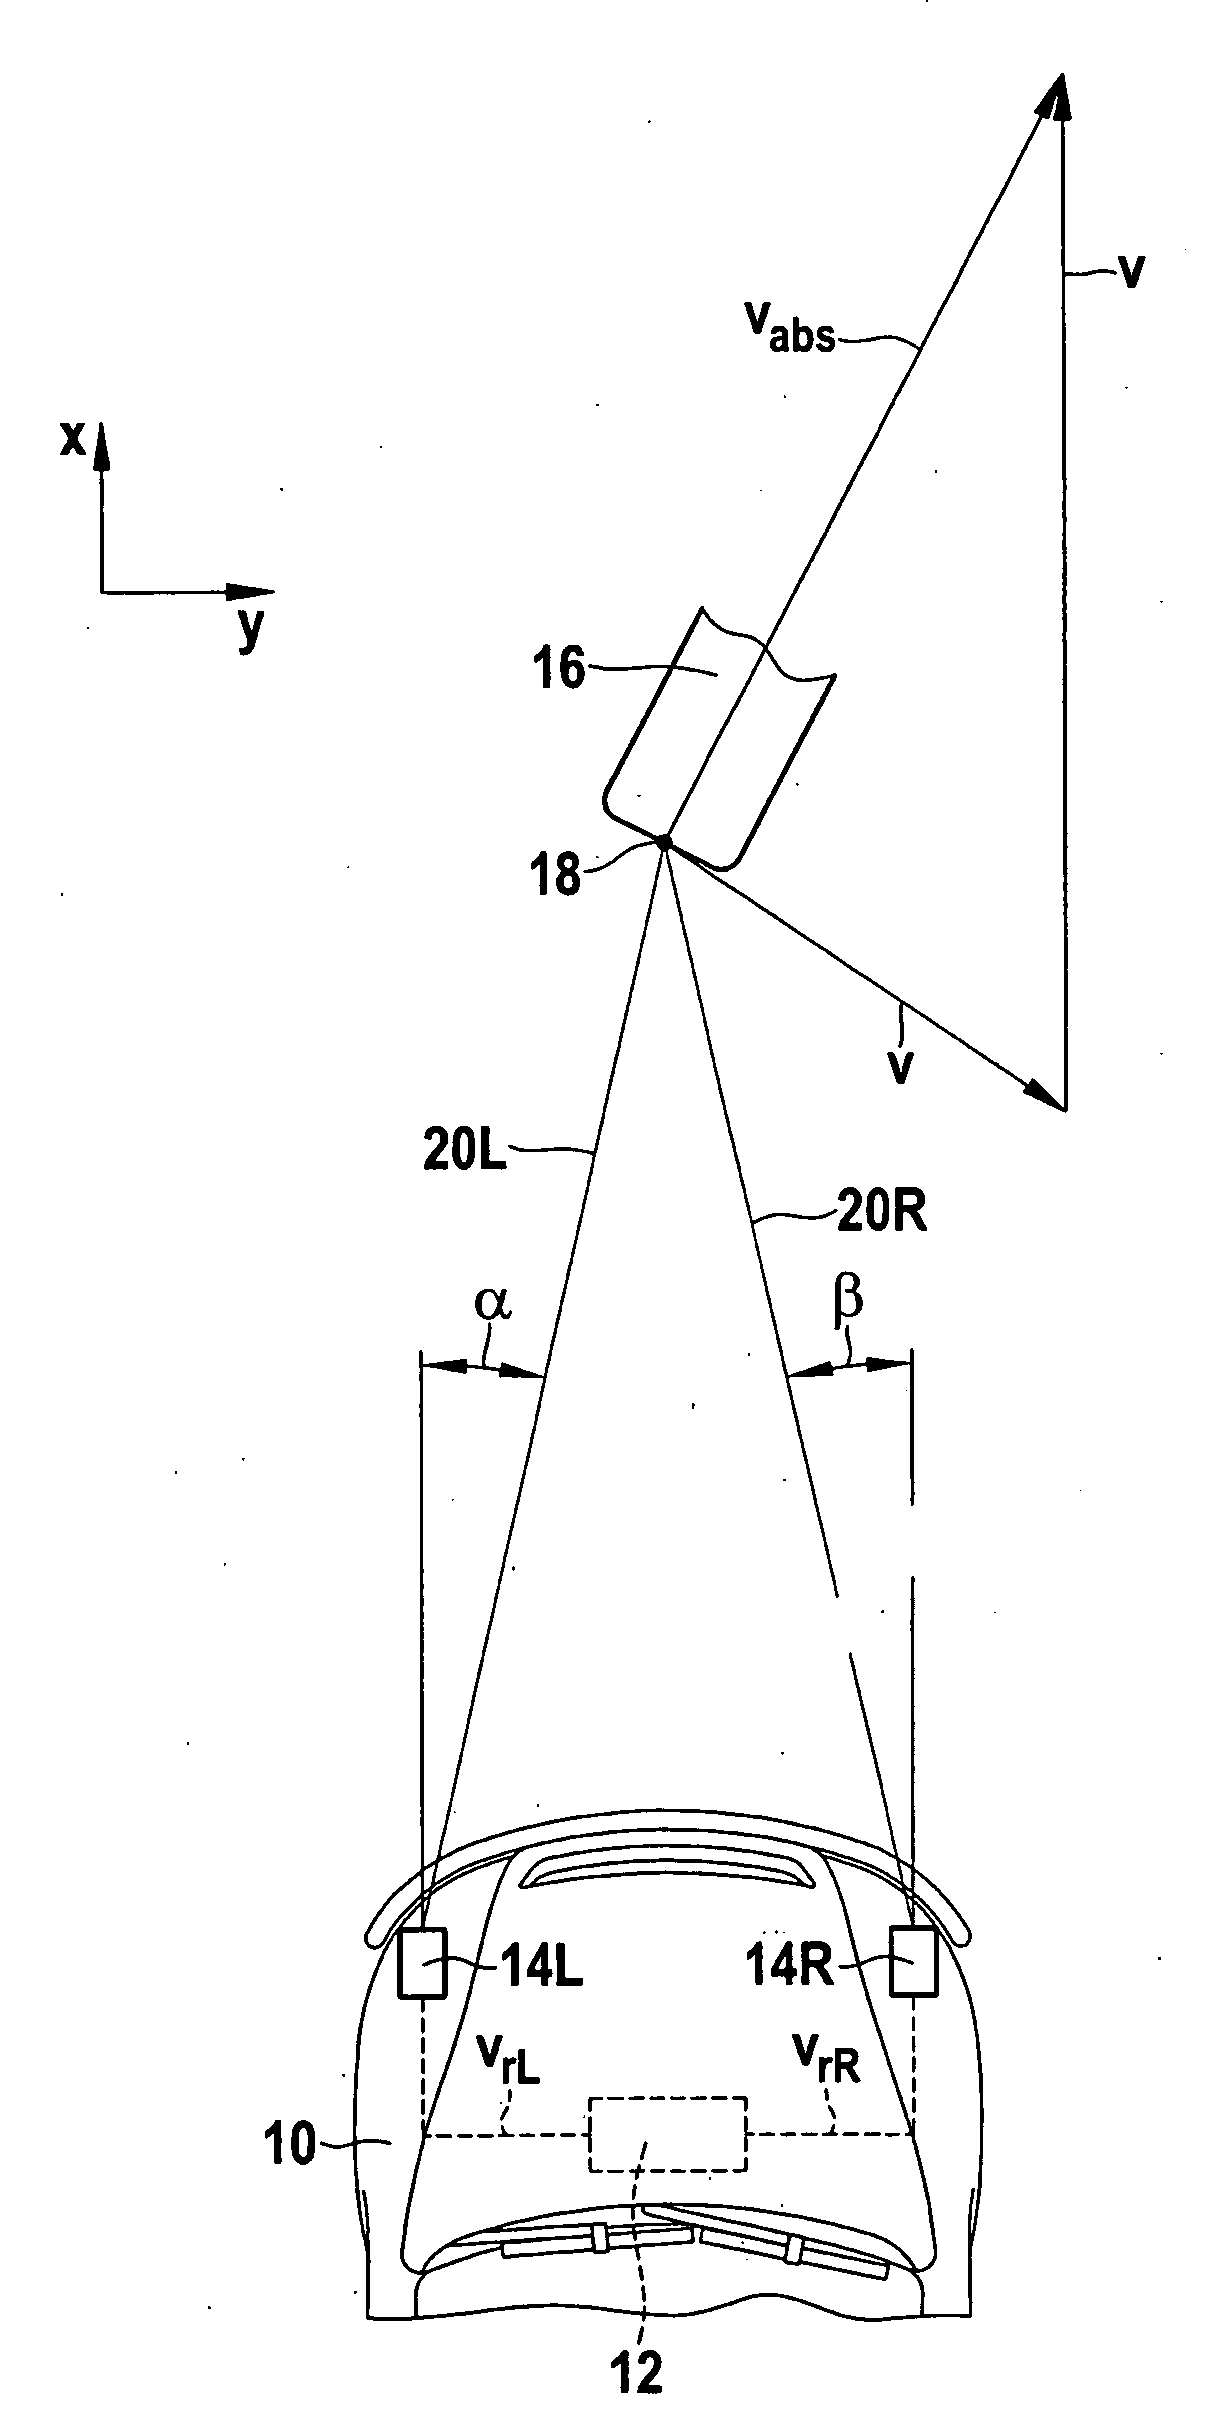 Method for measuring lateral movements in a driver assistance system